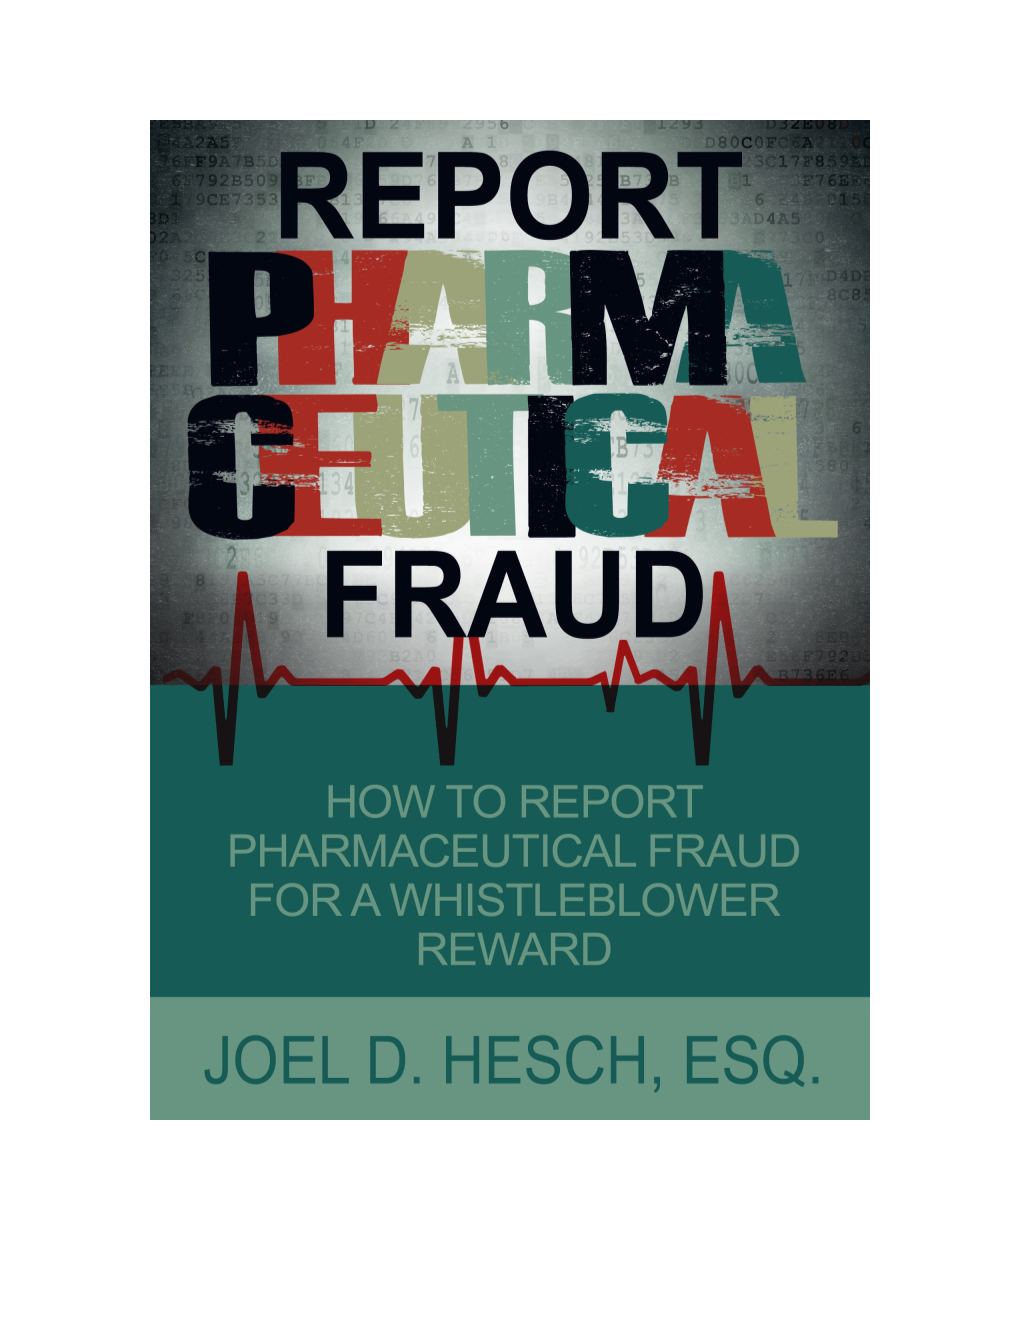 How to Report Pharmaceutical Fraud for a Whistleblower Reward